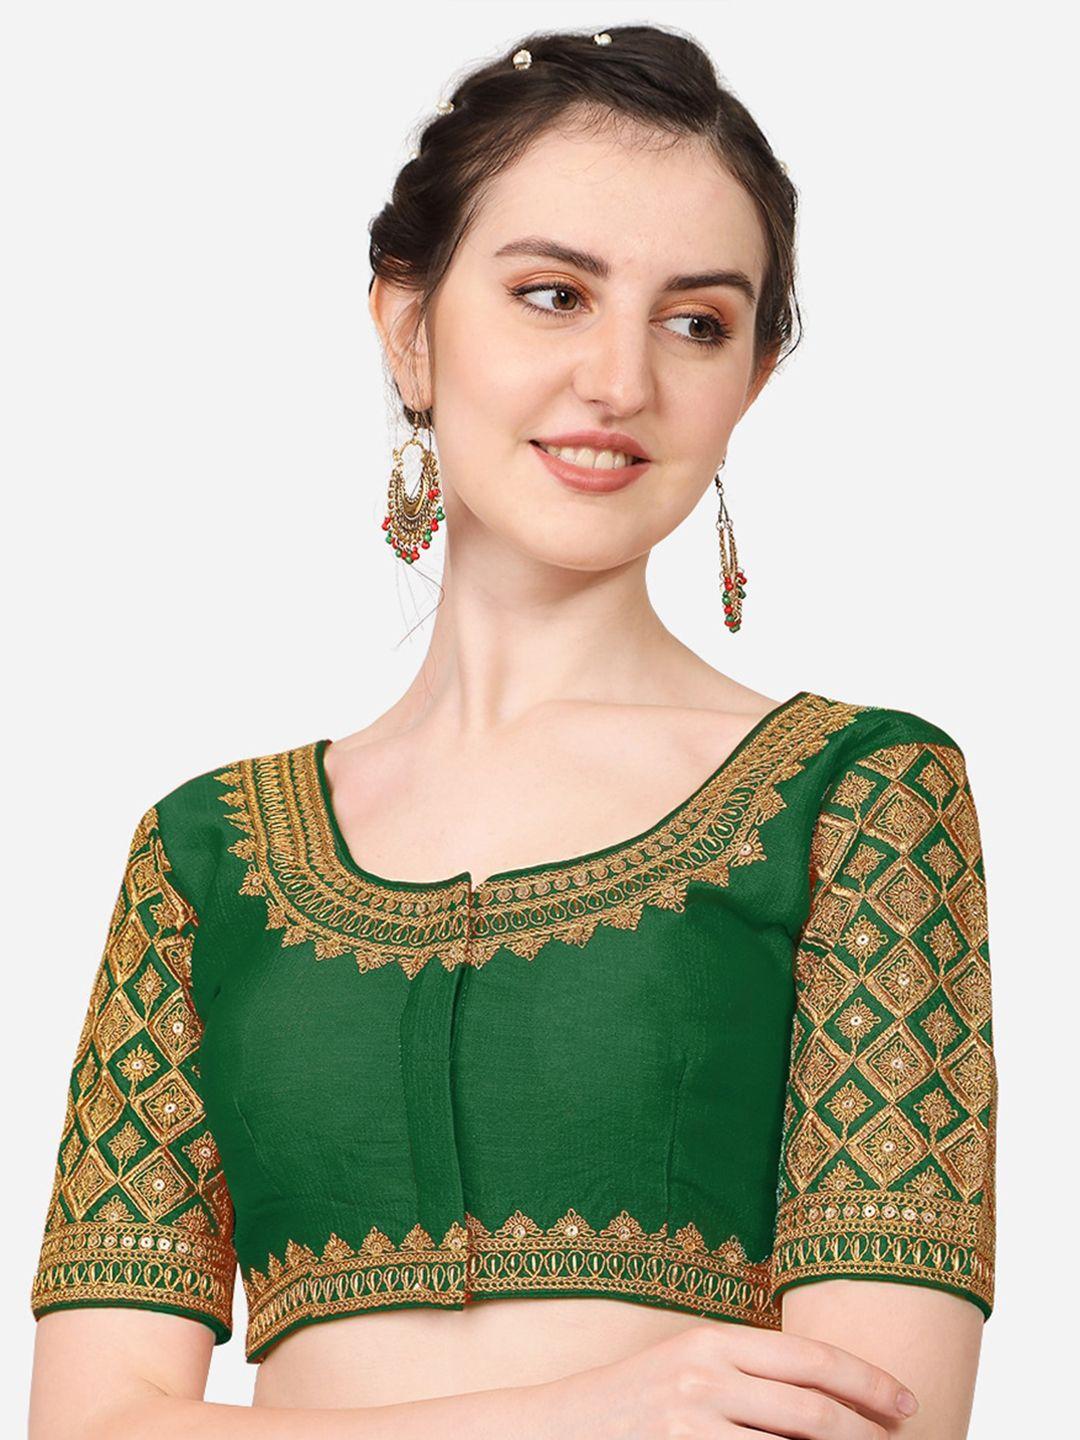 pujia mills green & gold-toned embroidered saree blouse